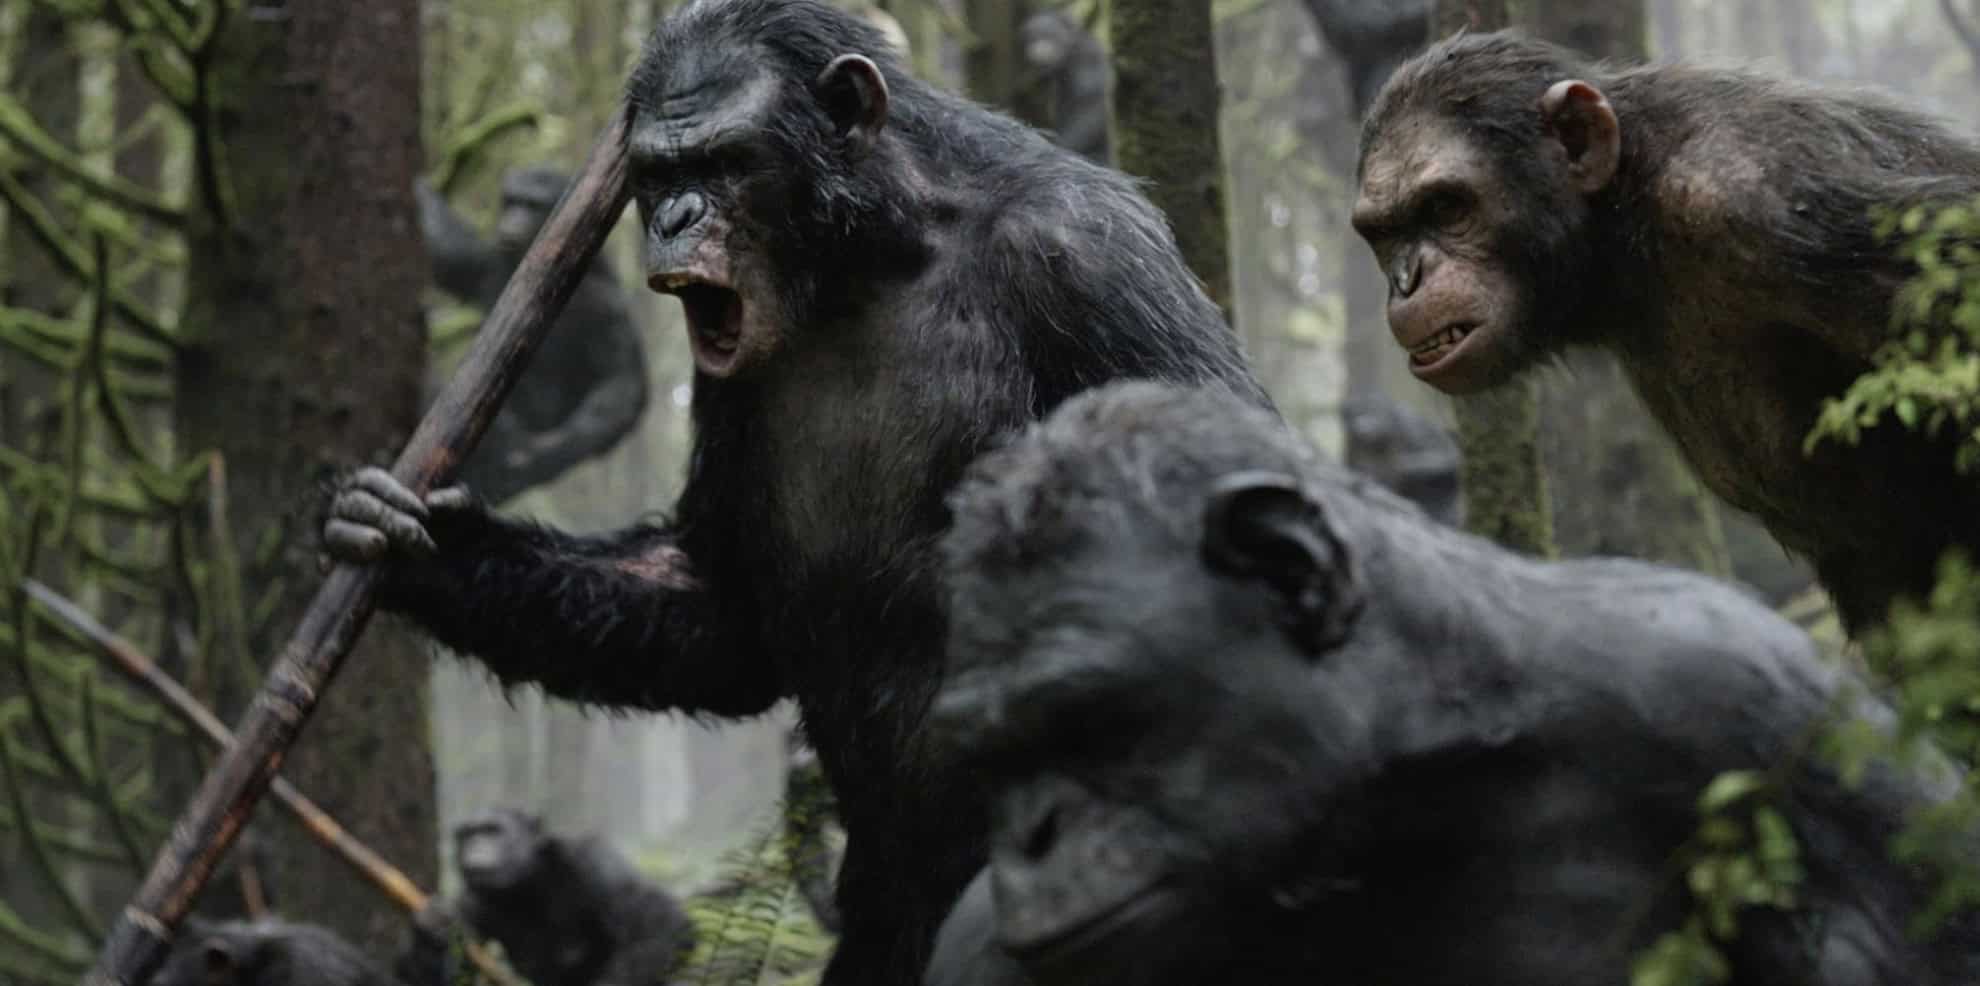 Three apes menacingly snarl in this image from Chernin Entertainment.